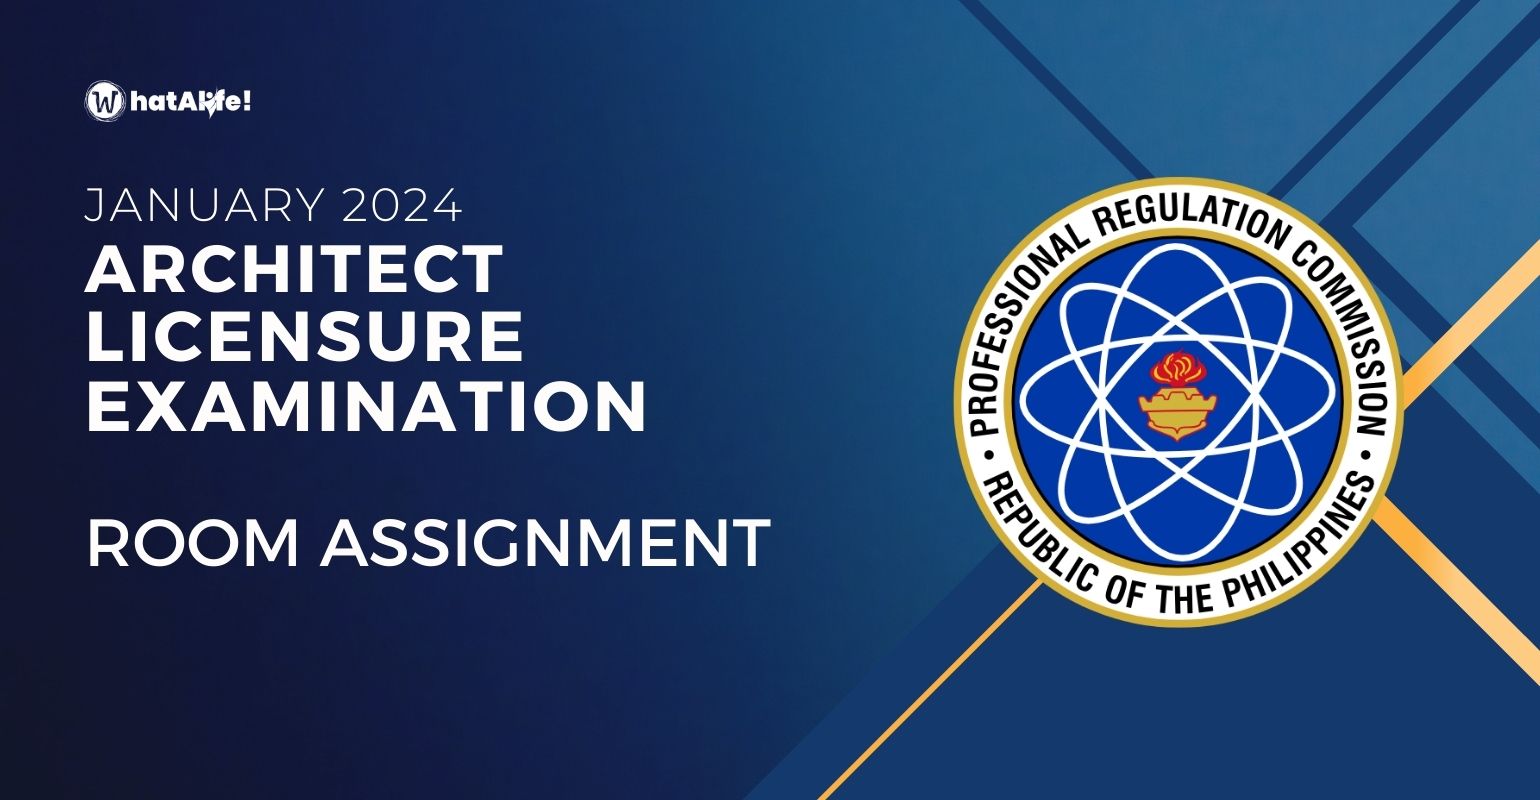 room assignment january 2024 architect licensure exam